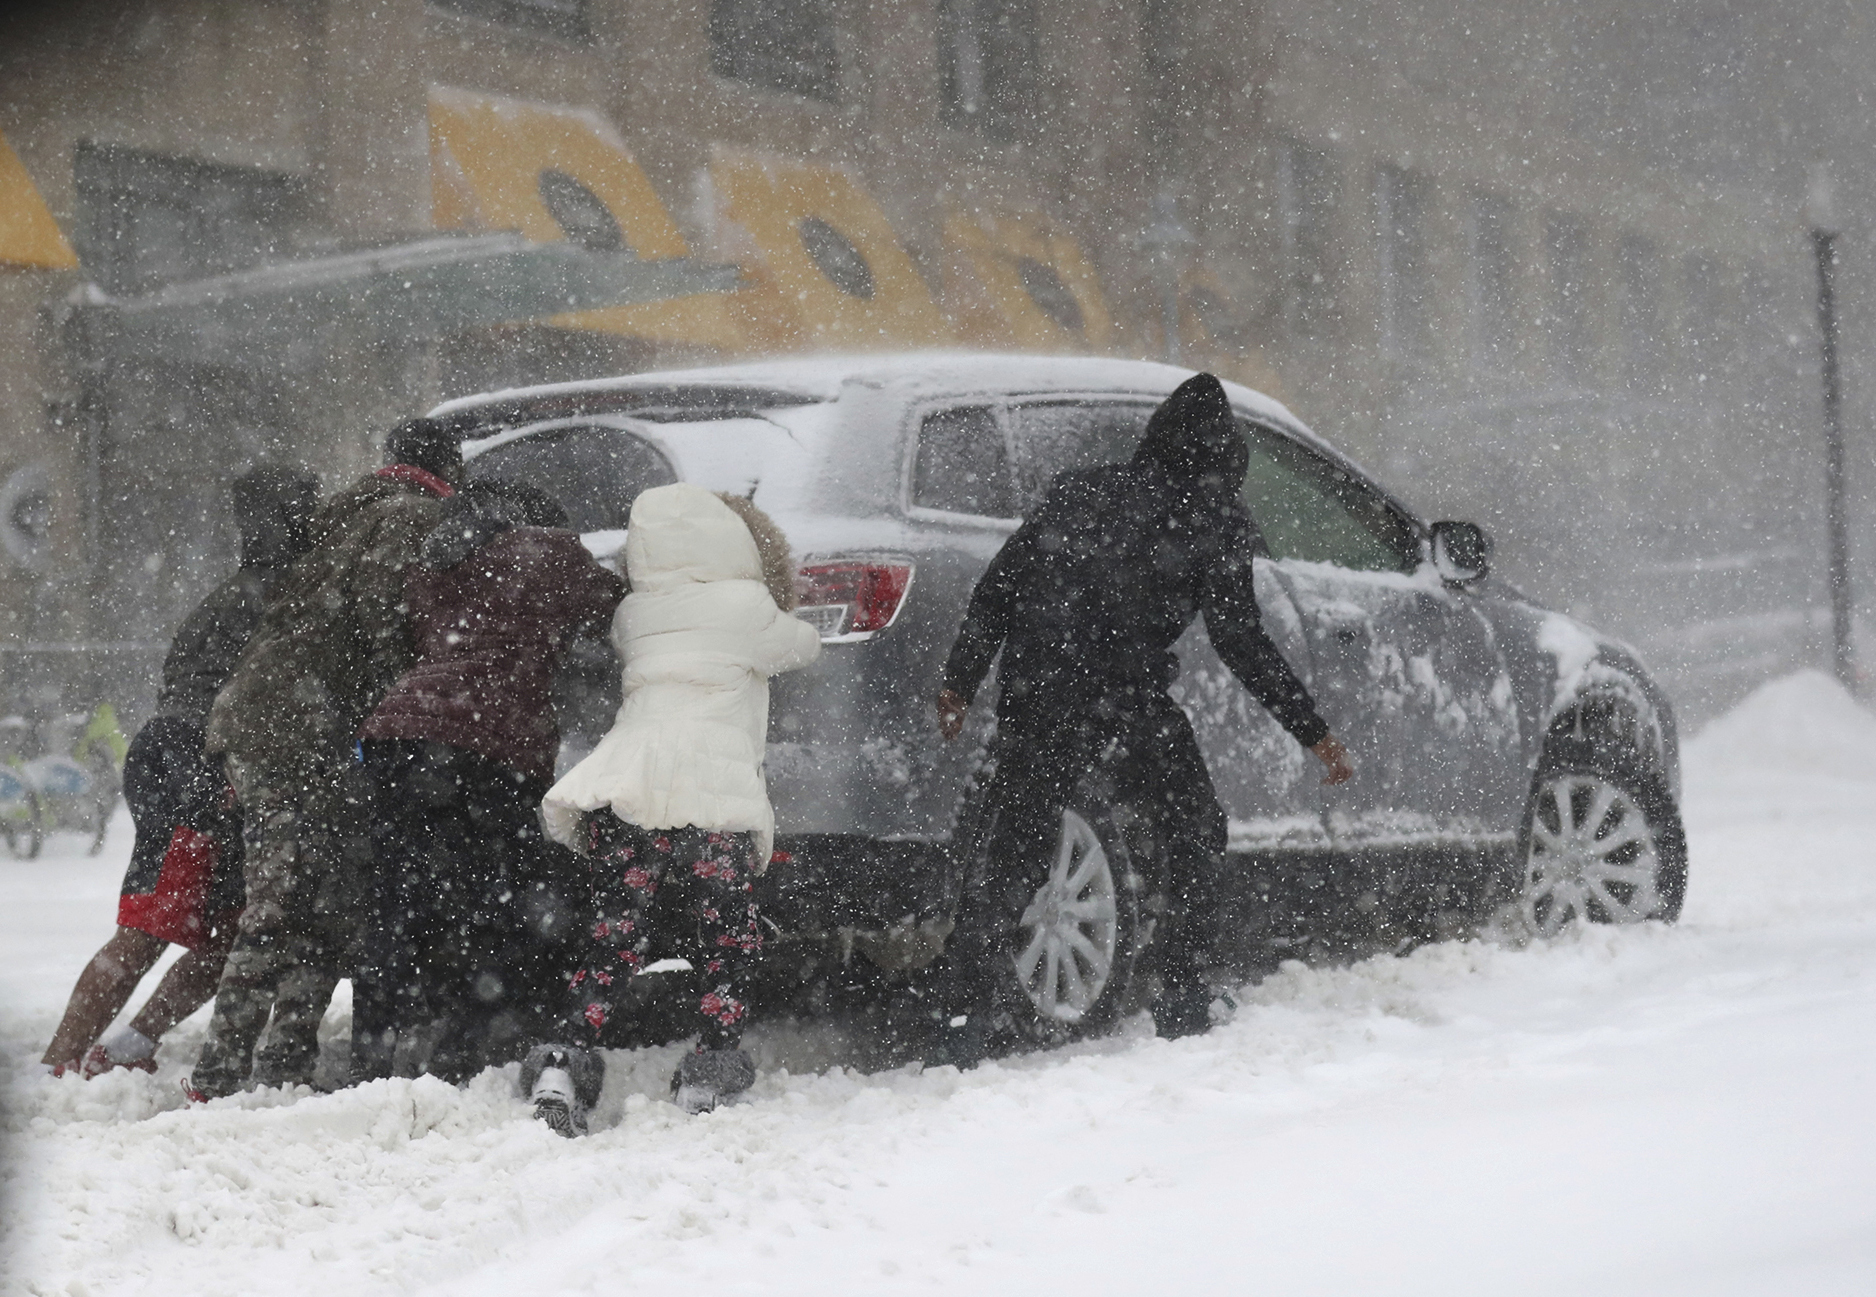 Storm blasts central US with snow, ice and wind, killing 3 – The ...